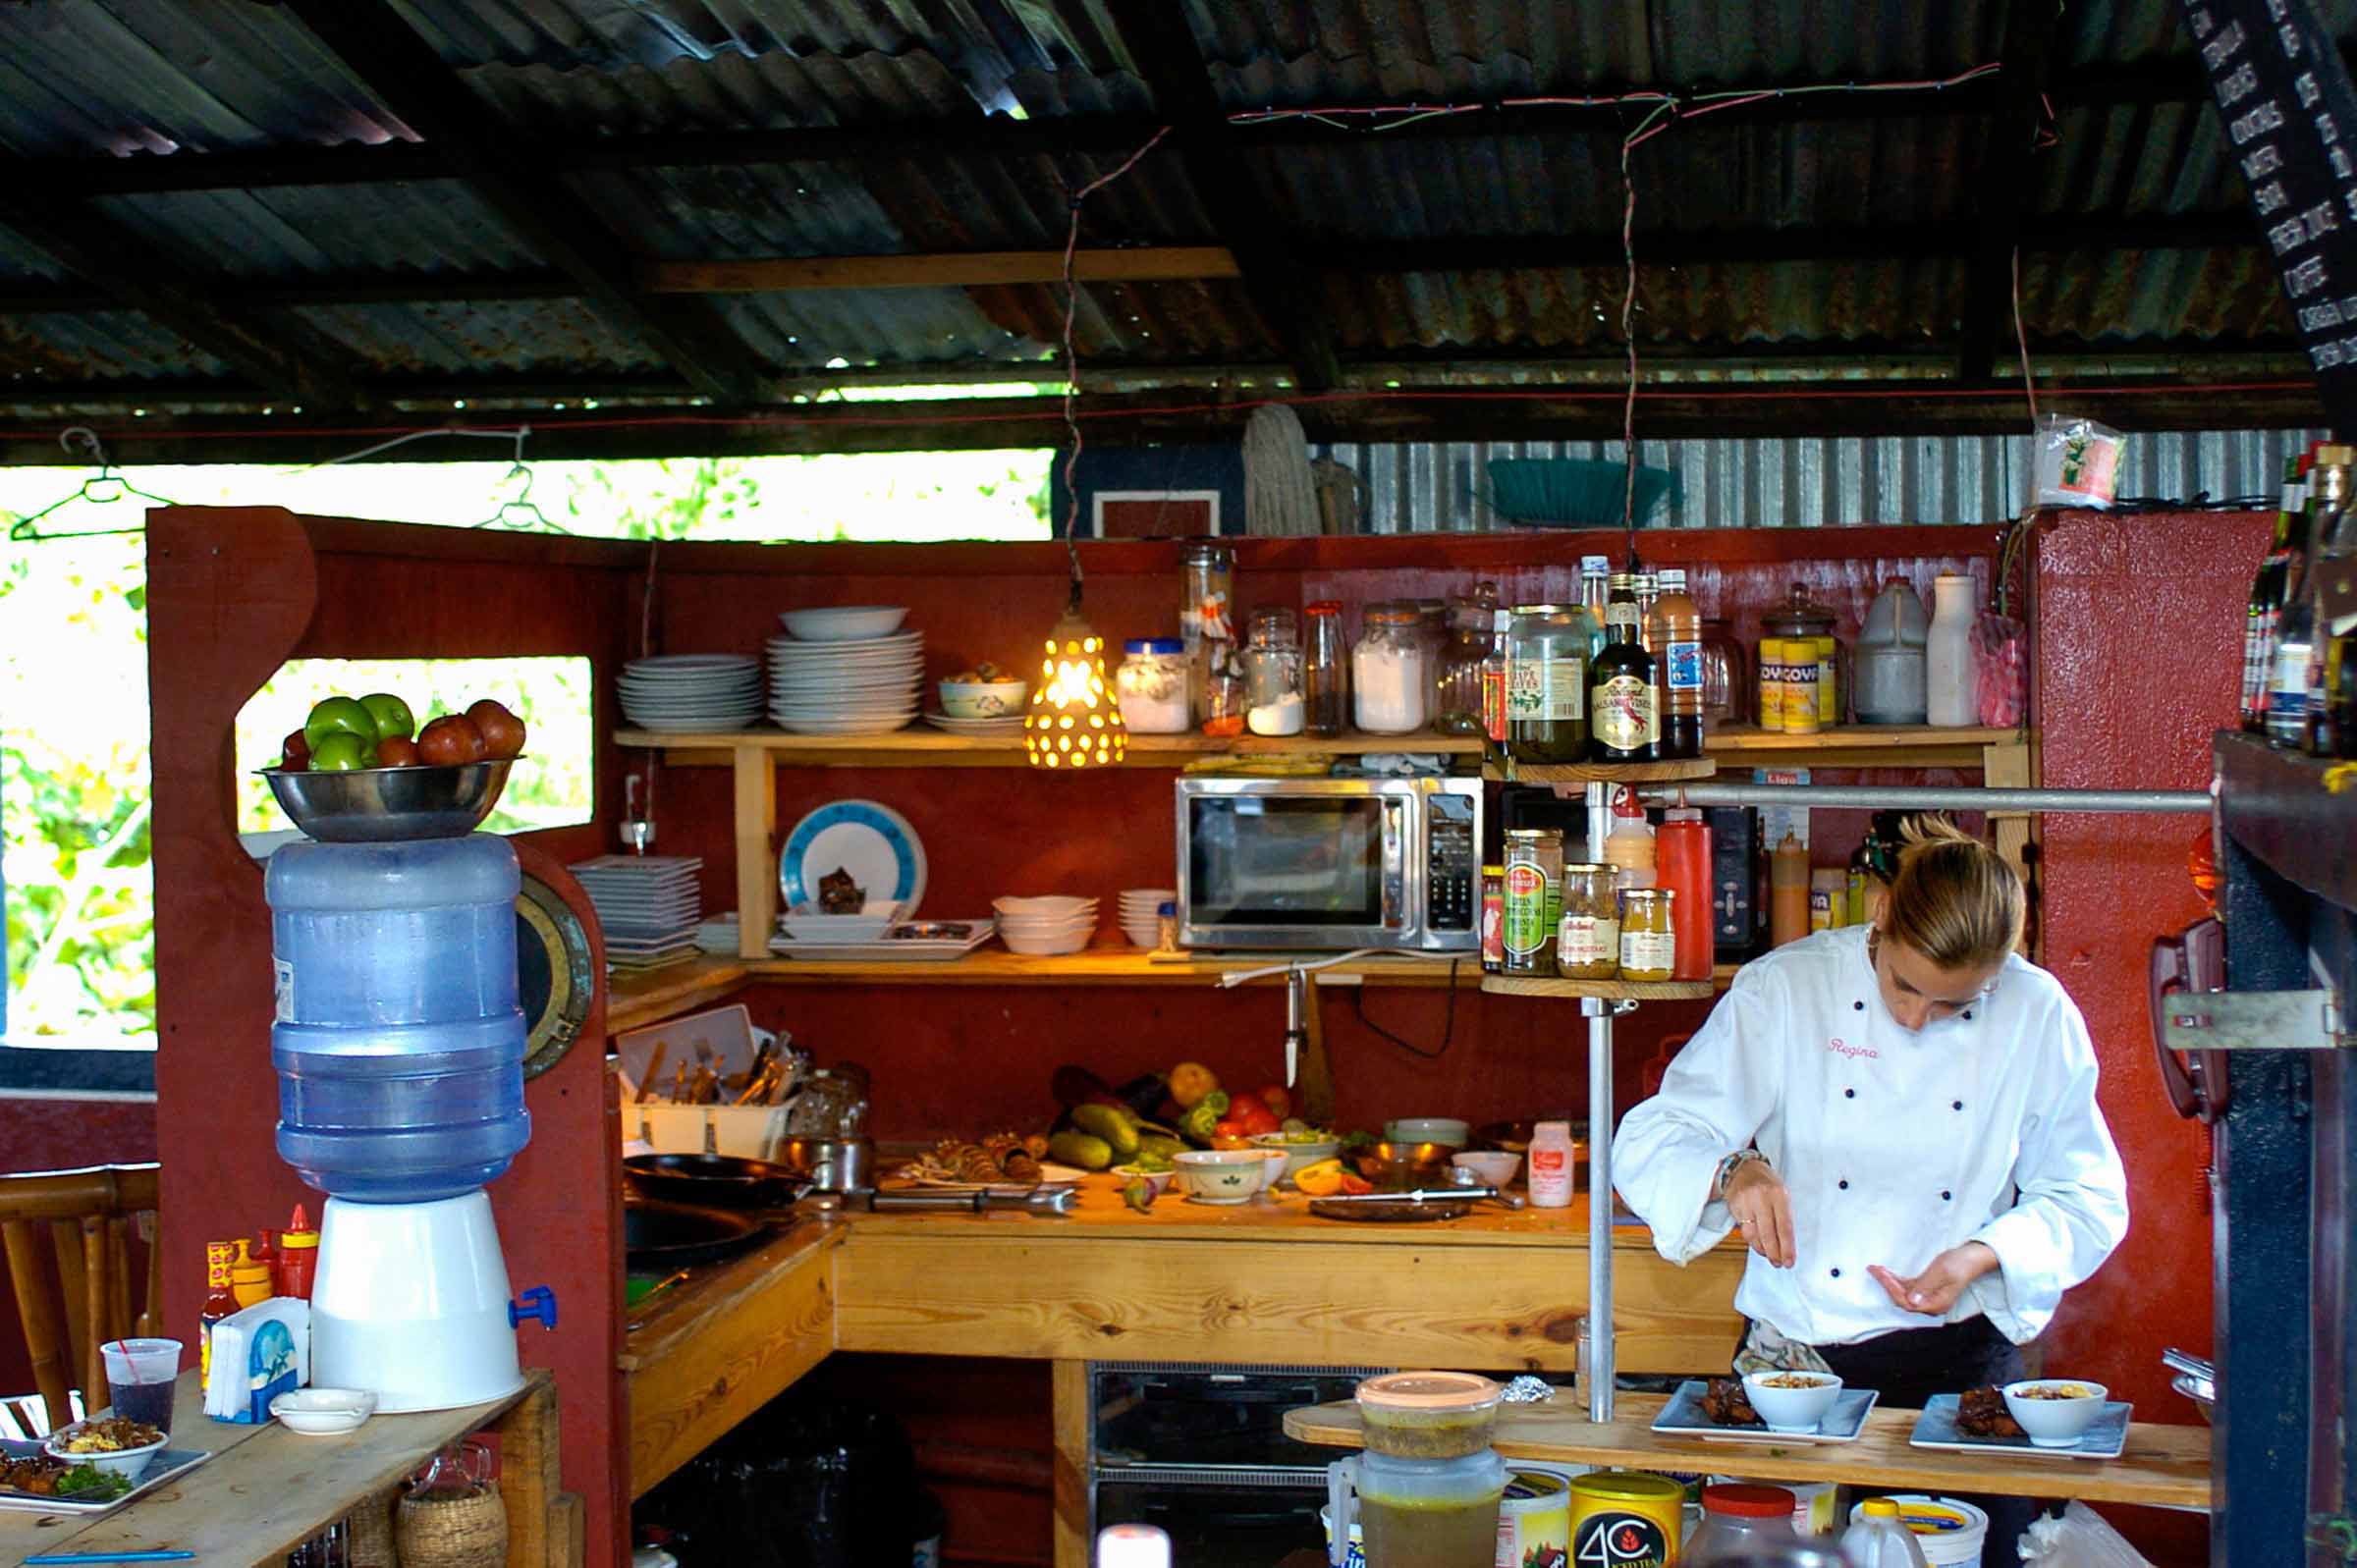 Dominican Republic - Gina's restaurant is open to the Caribbean air.